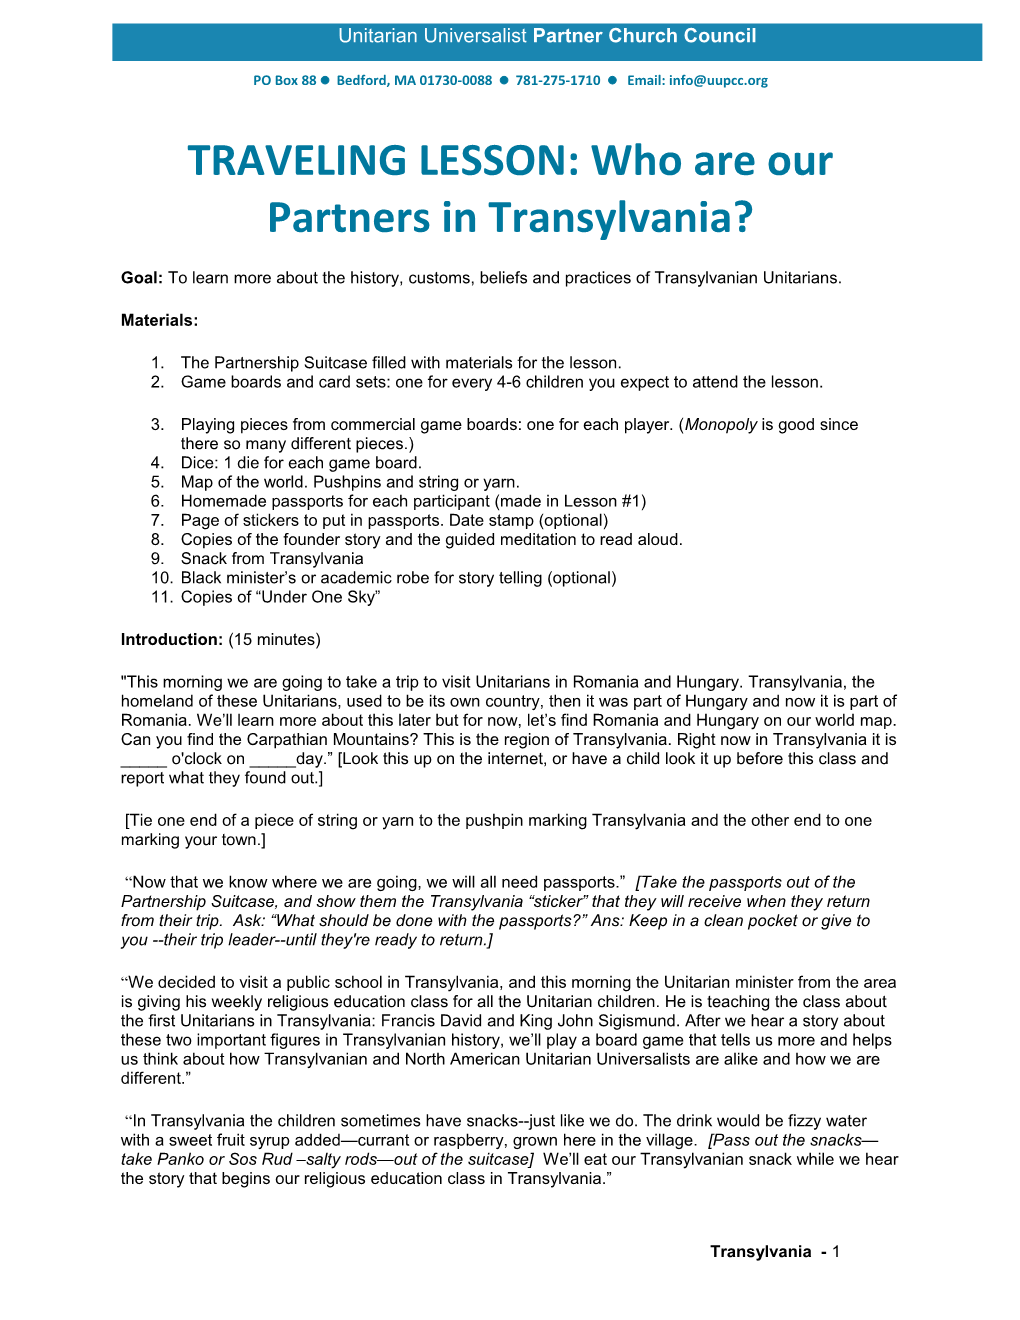 TRAVELING LESSON: Who Are Our Partners in Transylvania?